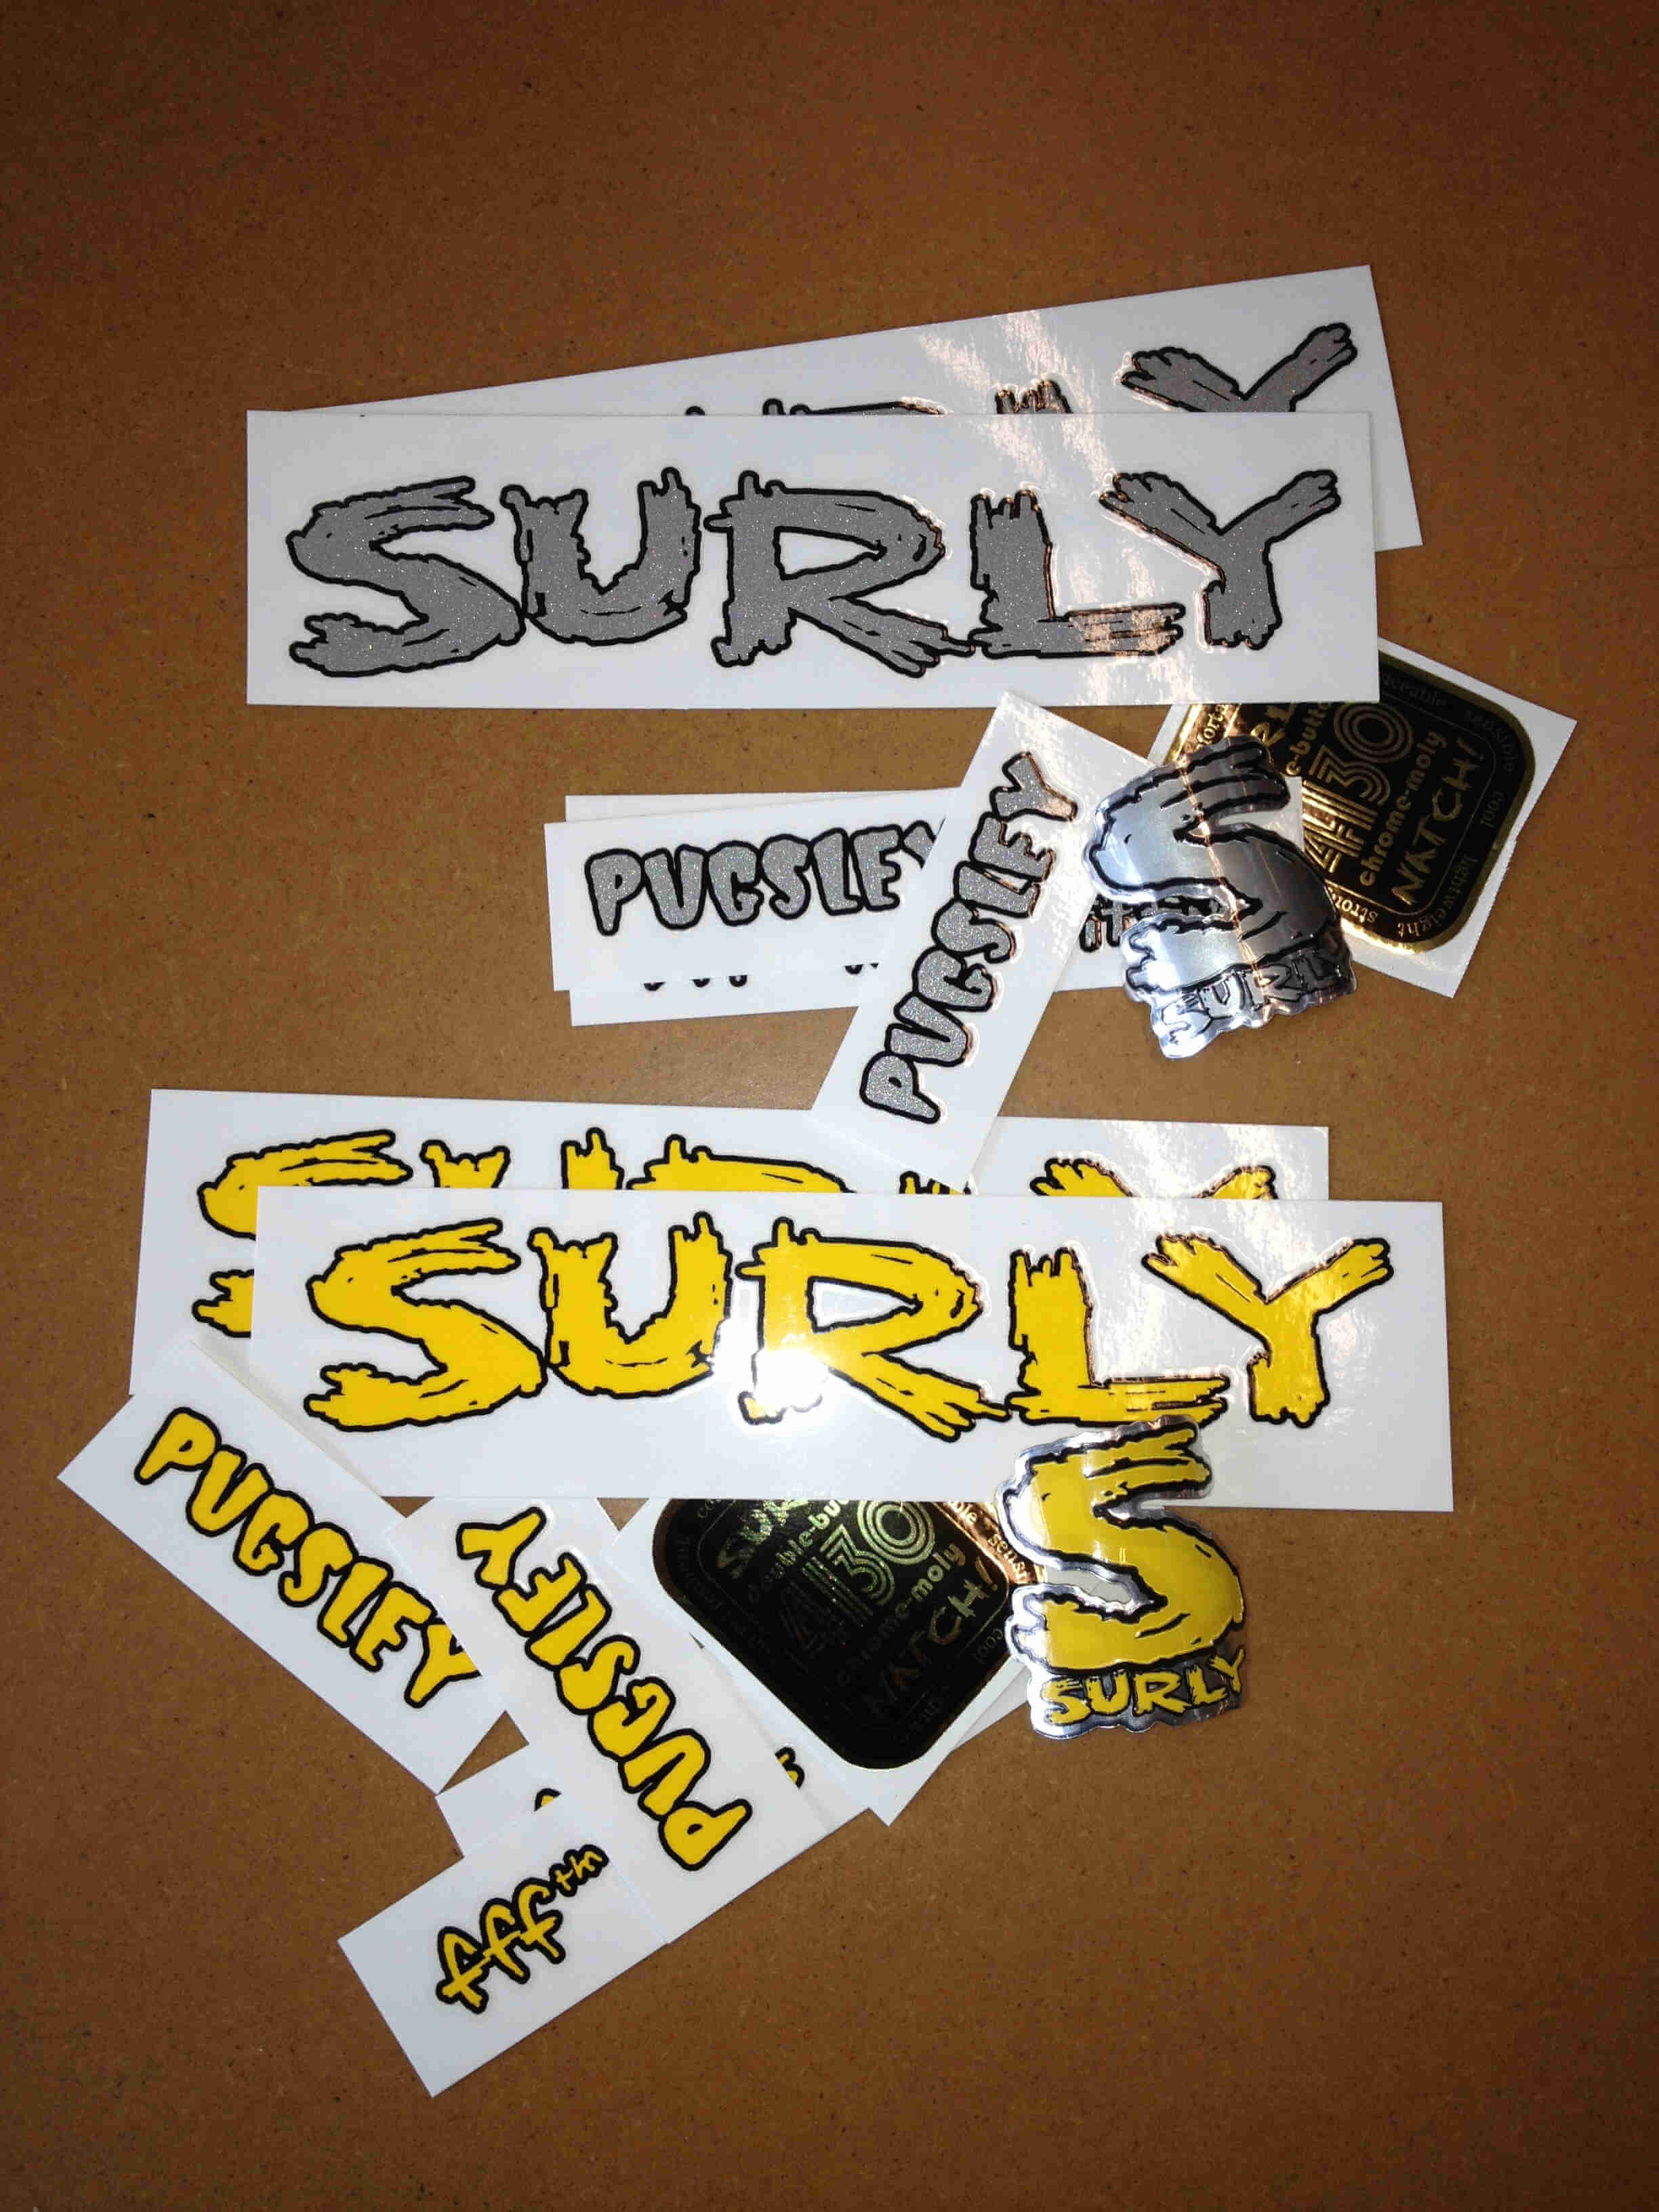 Downward view of Surly Pugsley bike decals, laying scattered on a brown surface